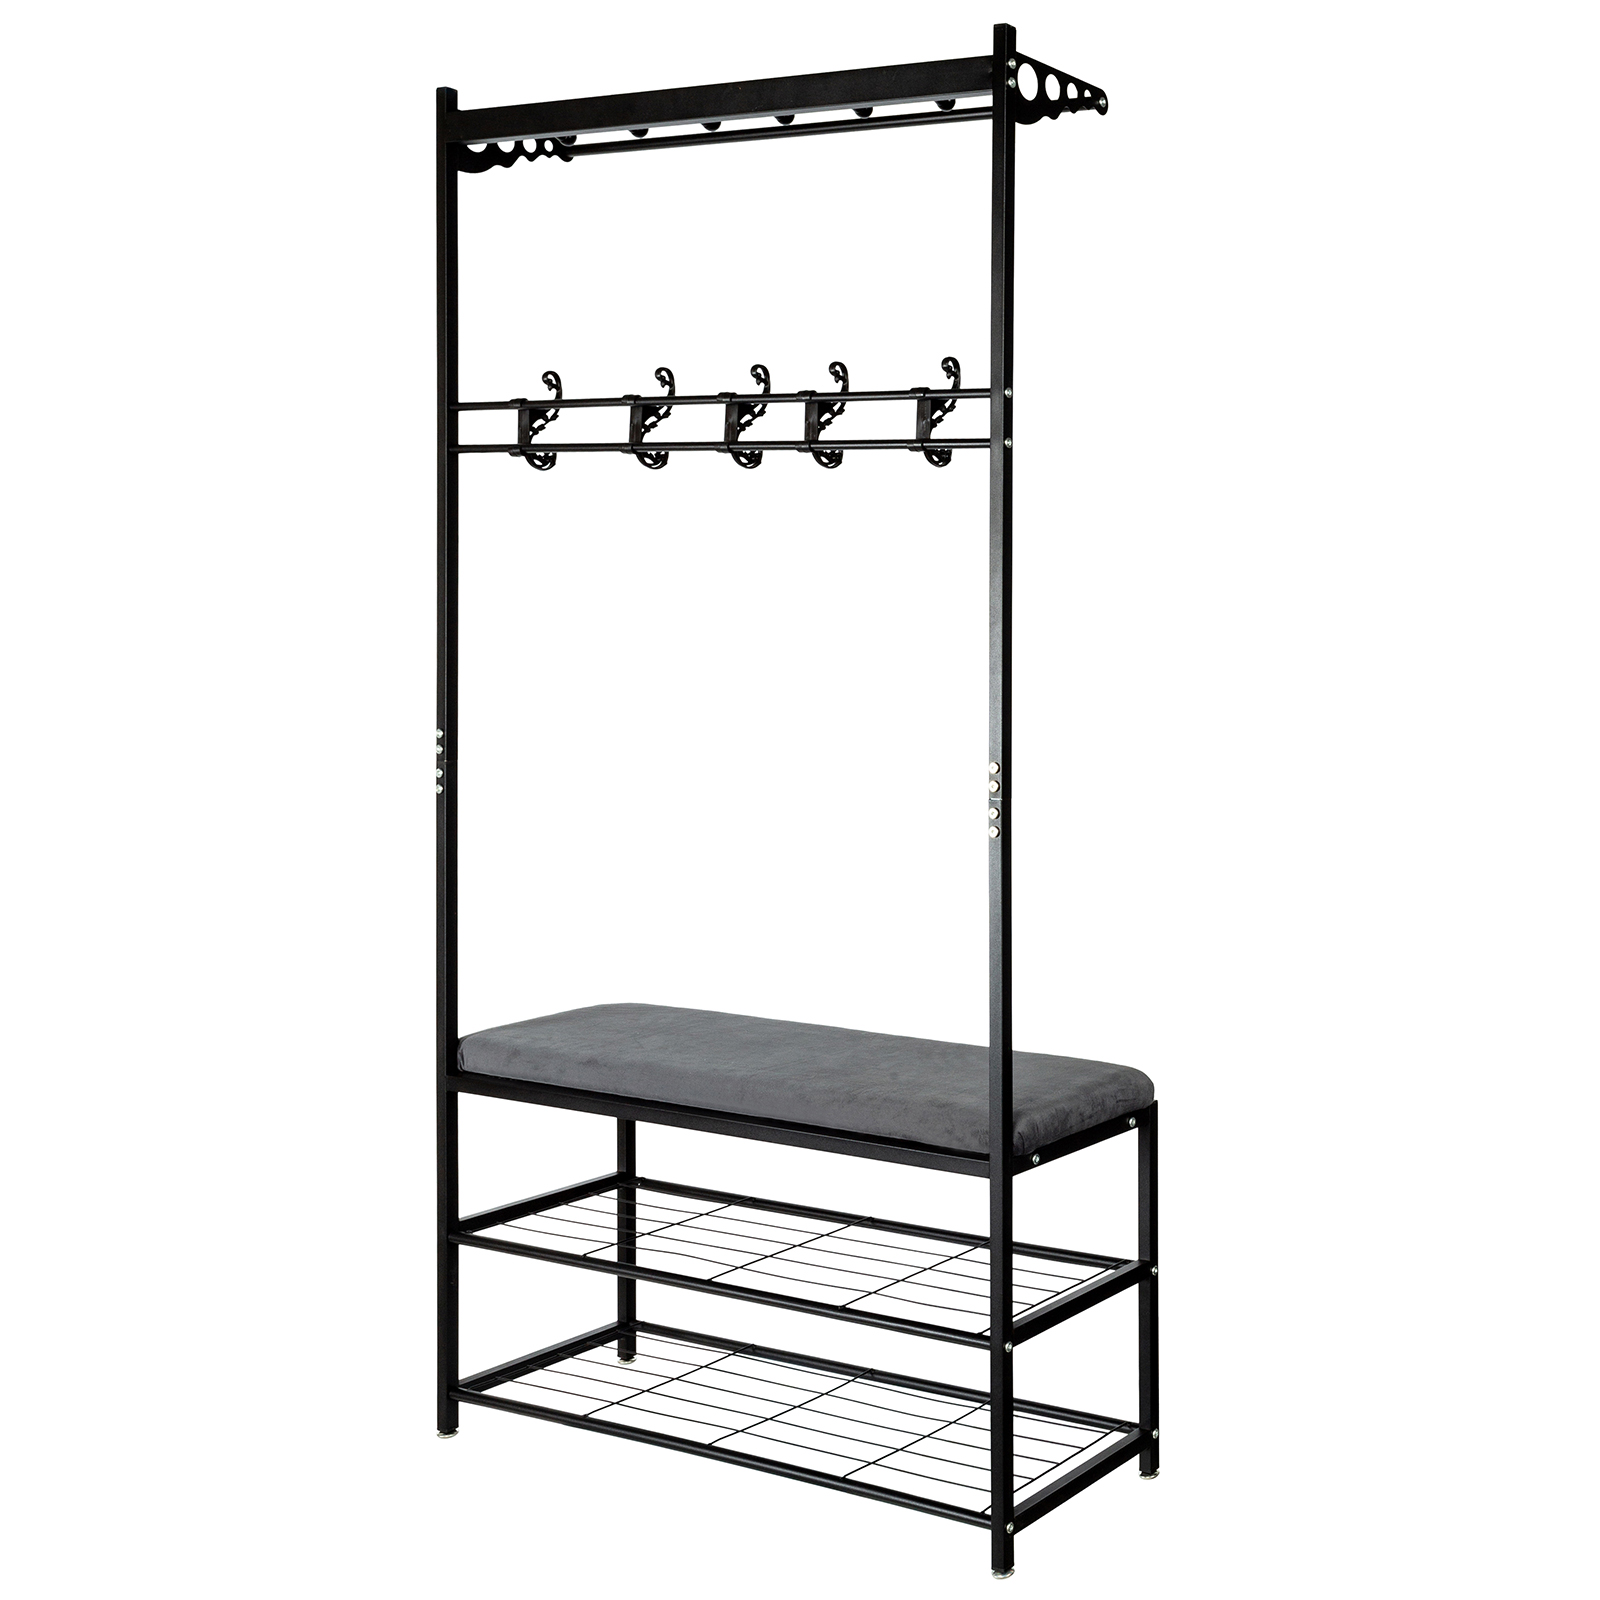 Second Life Marketplace - [satus Inc] Wall Mounted Shoe Rack (3 in 1)